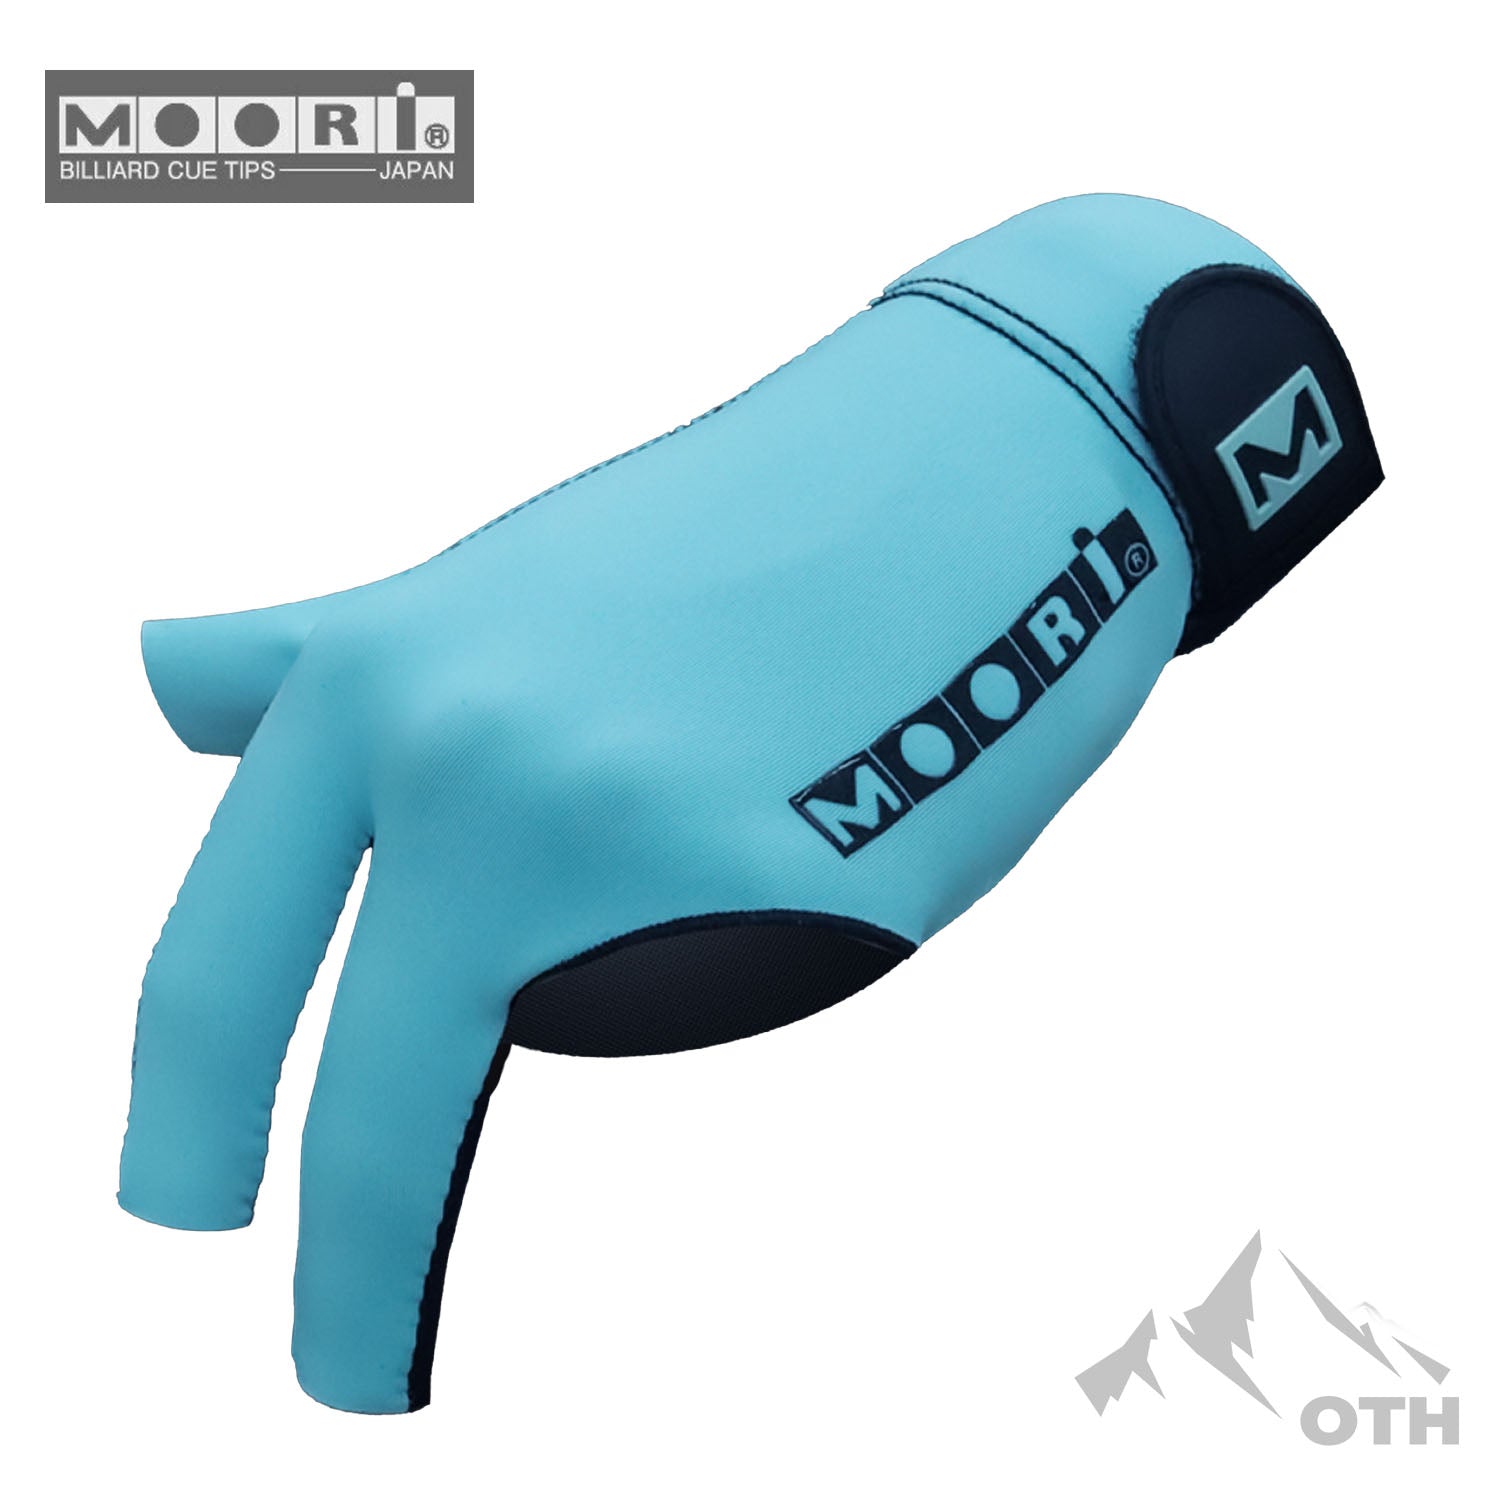 Moori Tips: Introducing our extraordinary Billiard Glove – Its strong wrinkle resistance ensures a sleek appearance, while the strategic silicone pad enhances stability for precise shots. With ultra-breathable mesh, this versatile glove keeps you cool and focused, whether you're a professional or amateur player*strong wrinkle-resistance*silicone*stability*ultra-breathable mesh